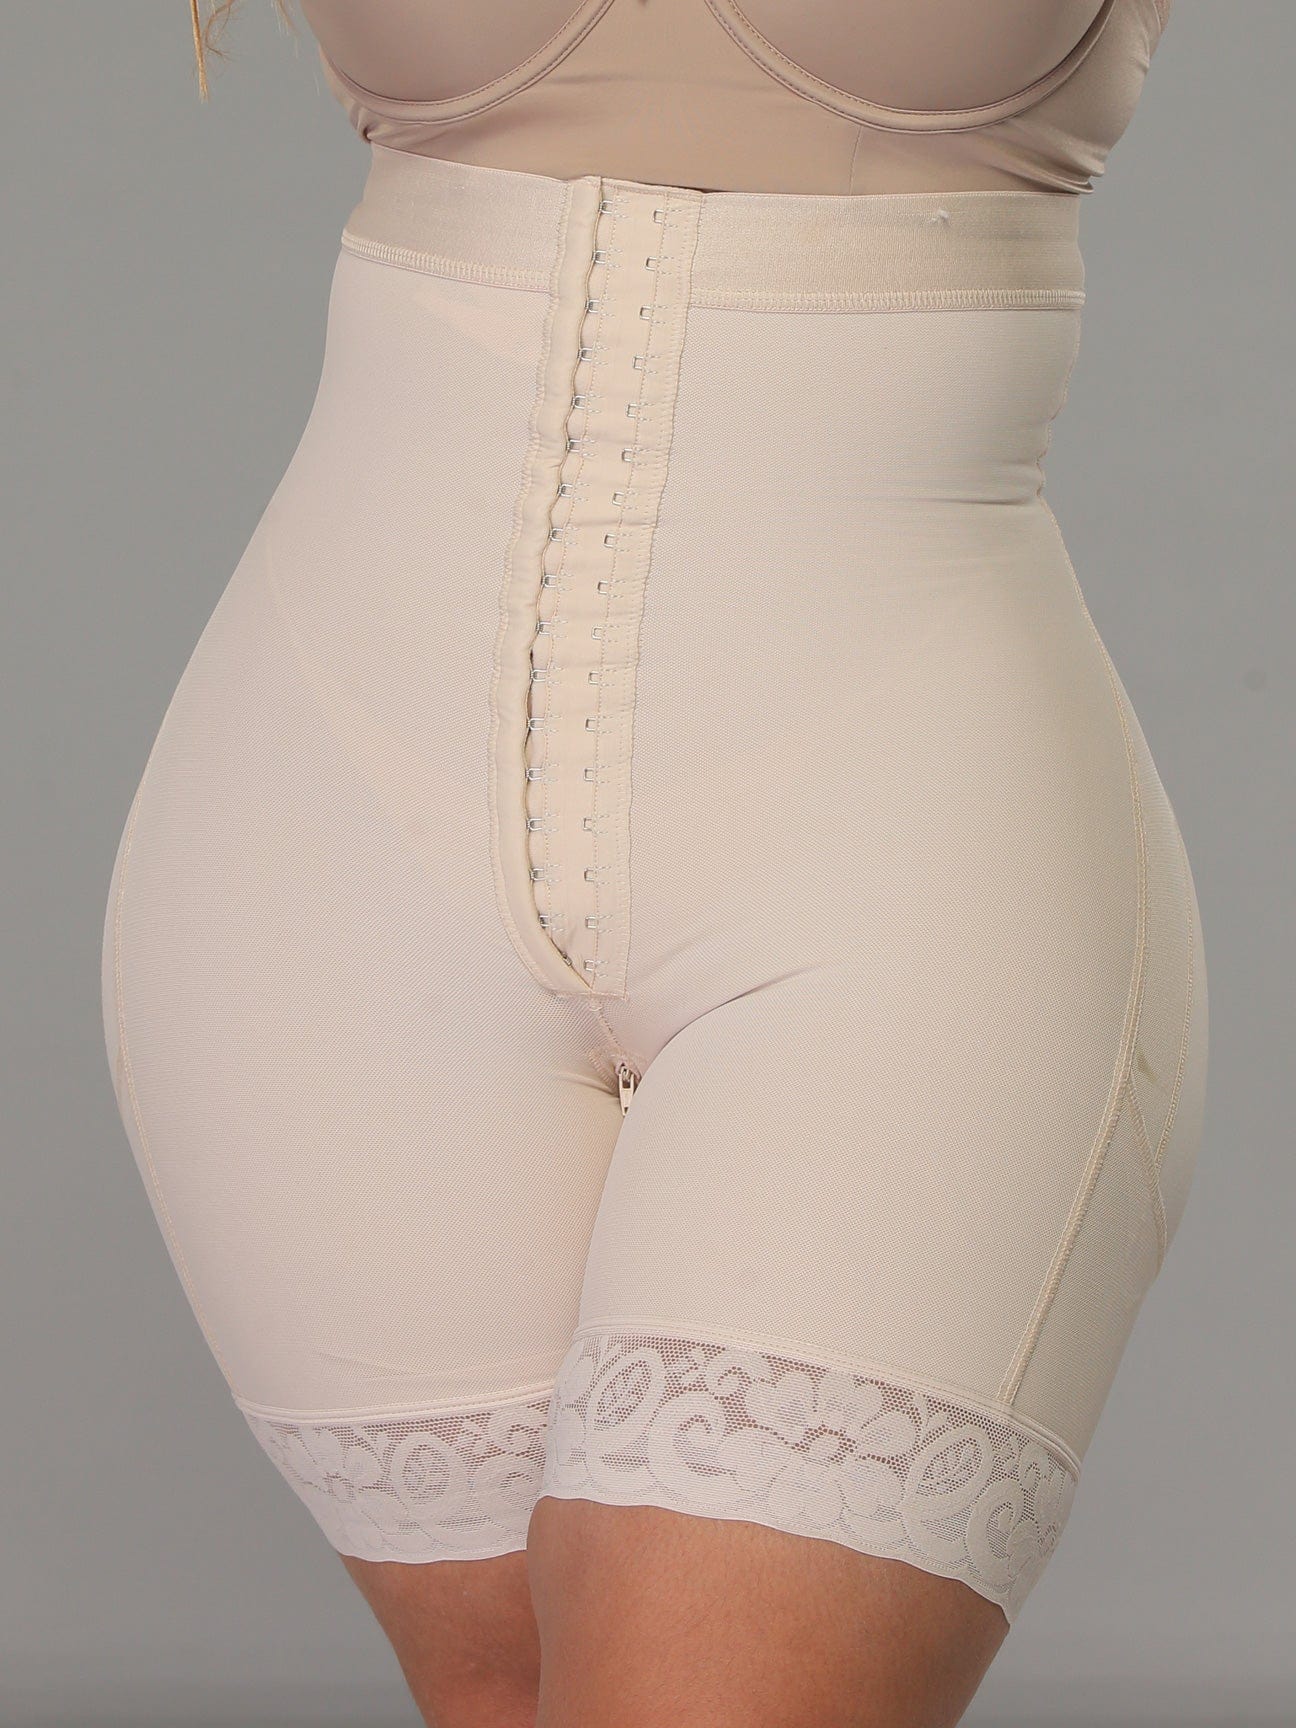 Strapless Powernet Hourglass Body Shaper with Butt Lift waist view beige color.